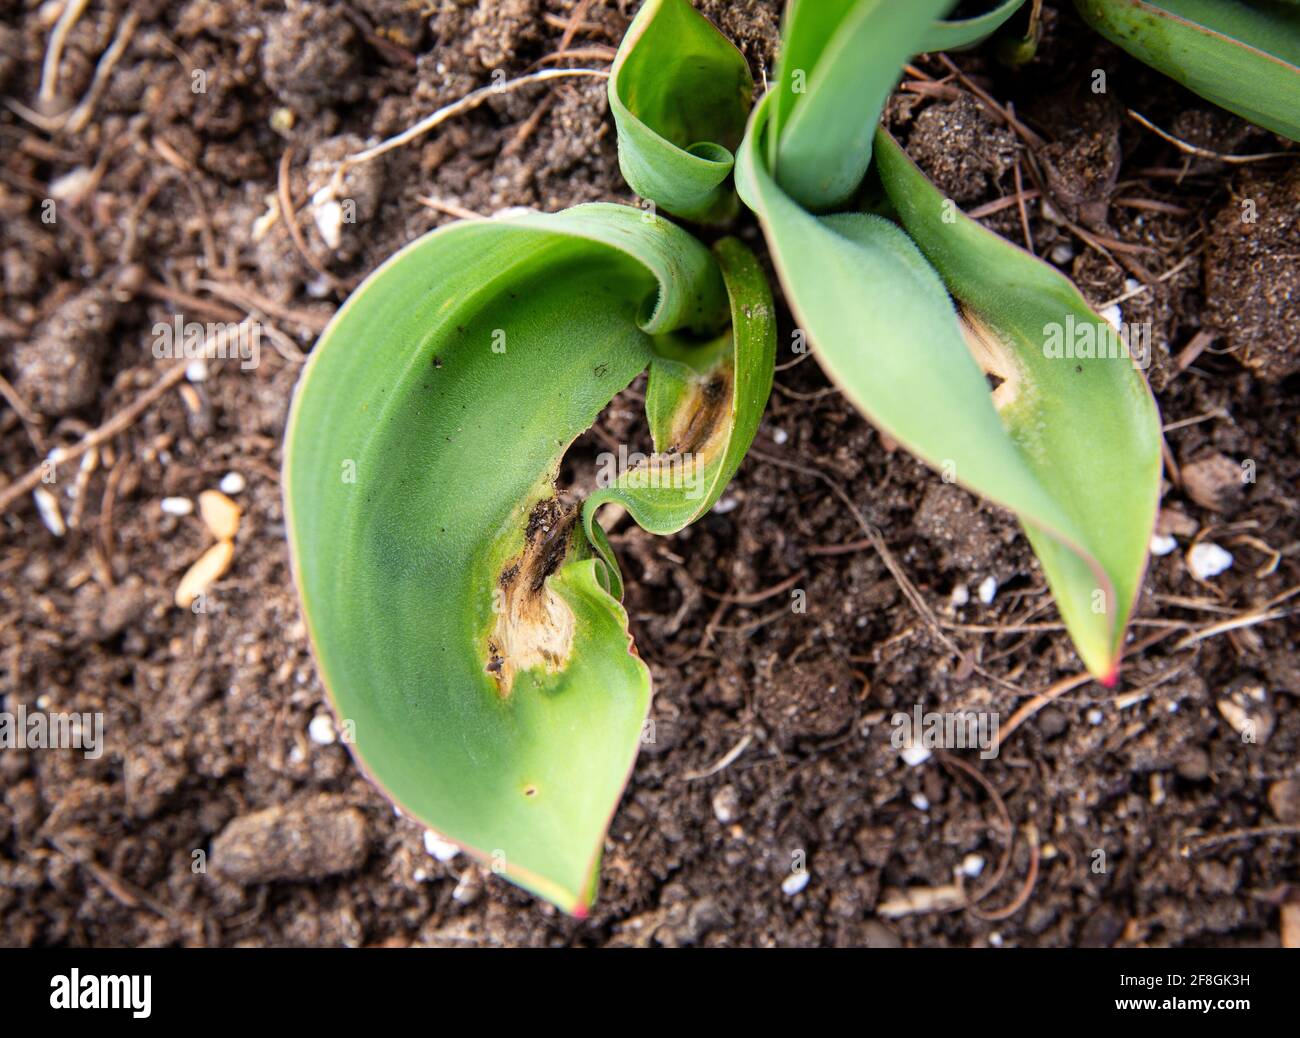 Botrytis tulipae is fungus that causes disease called tulip fire of flower tulips(Tulipa). Close up view of damaged tulip leaves in spring. Stock Photo